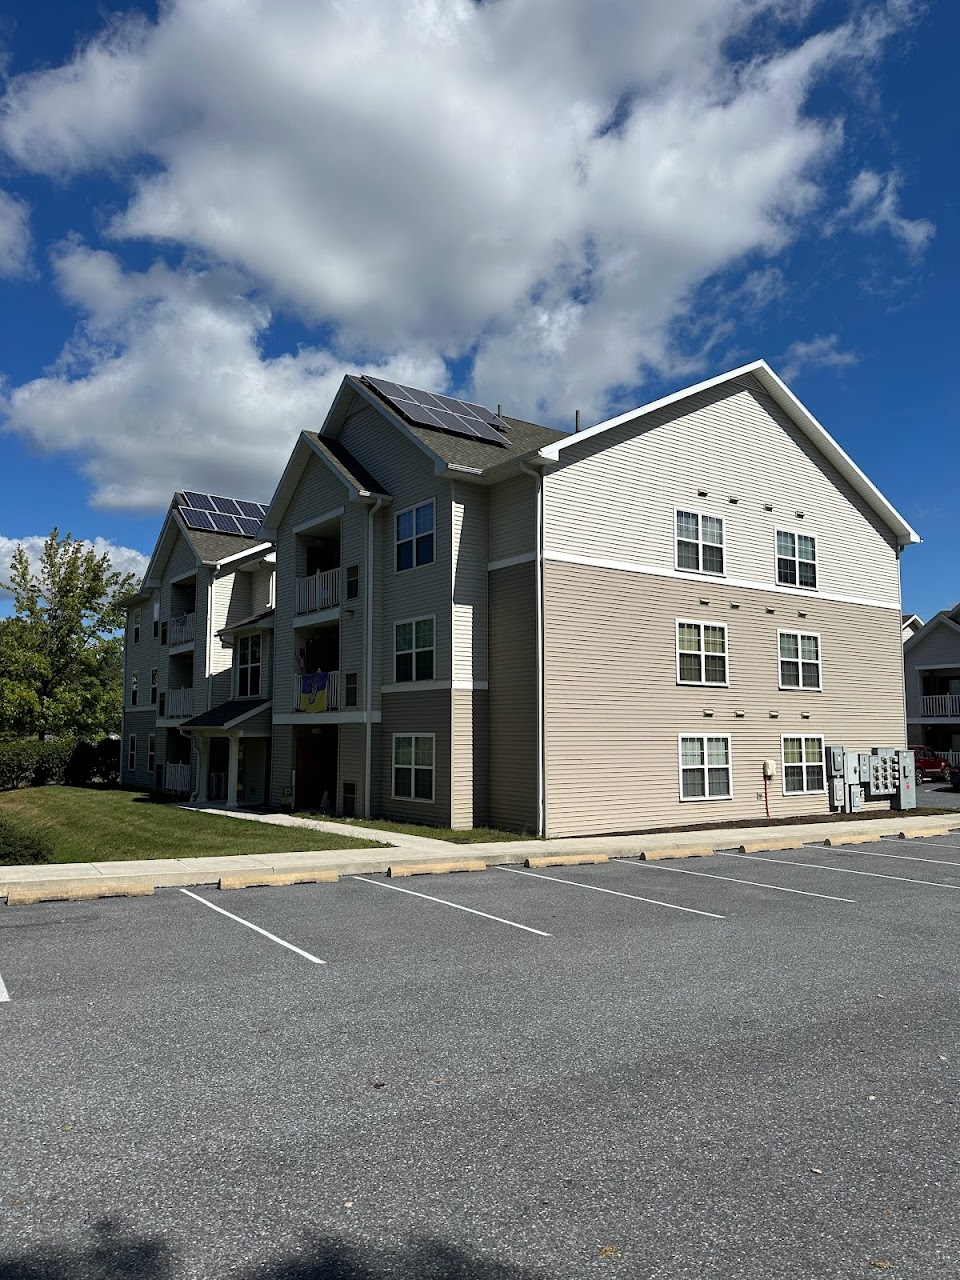 Photo of CROSSROADS (THE). Affordable housing located at 2141 CEDAR RUN DR CAMP HILL, PA 17011